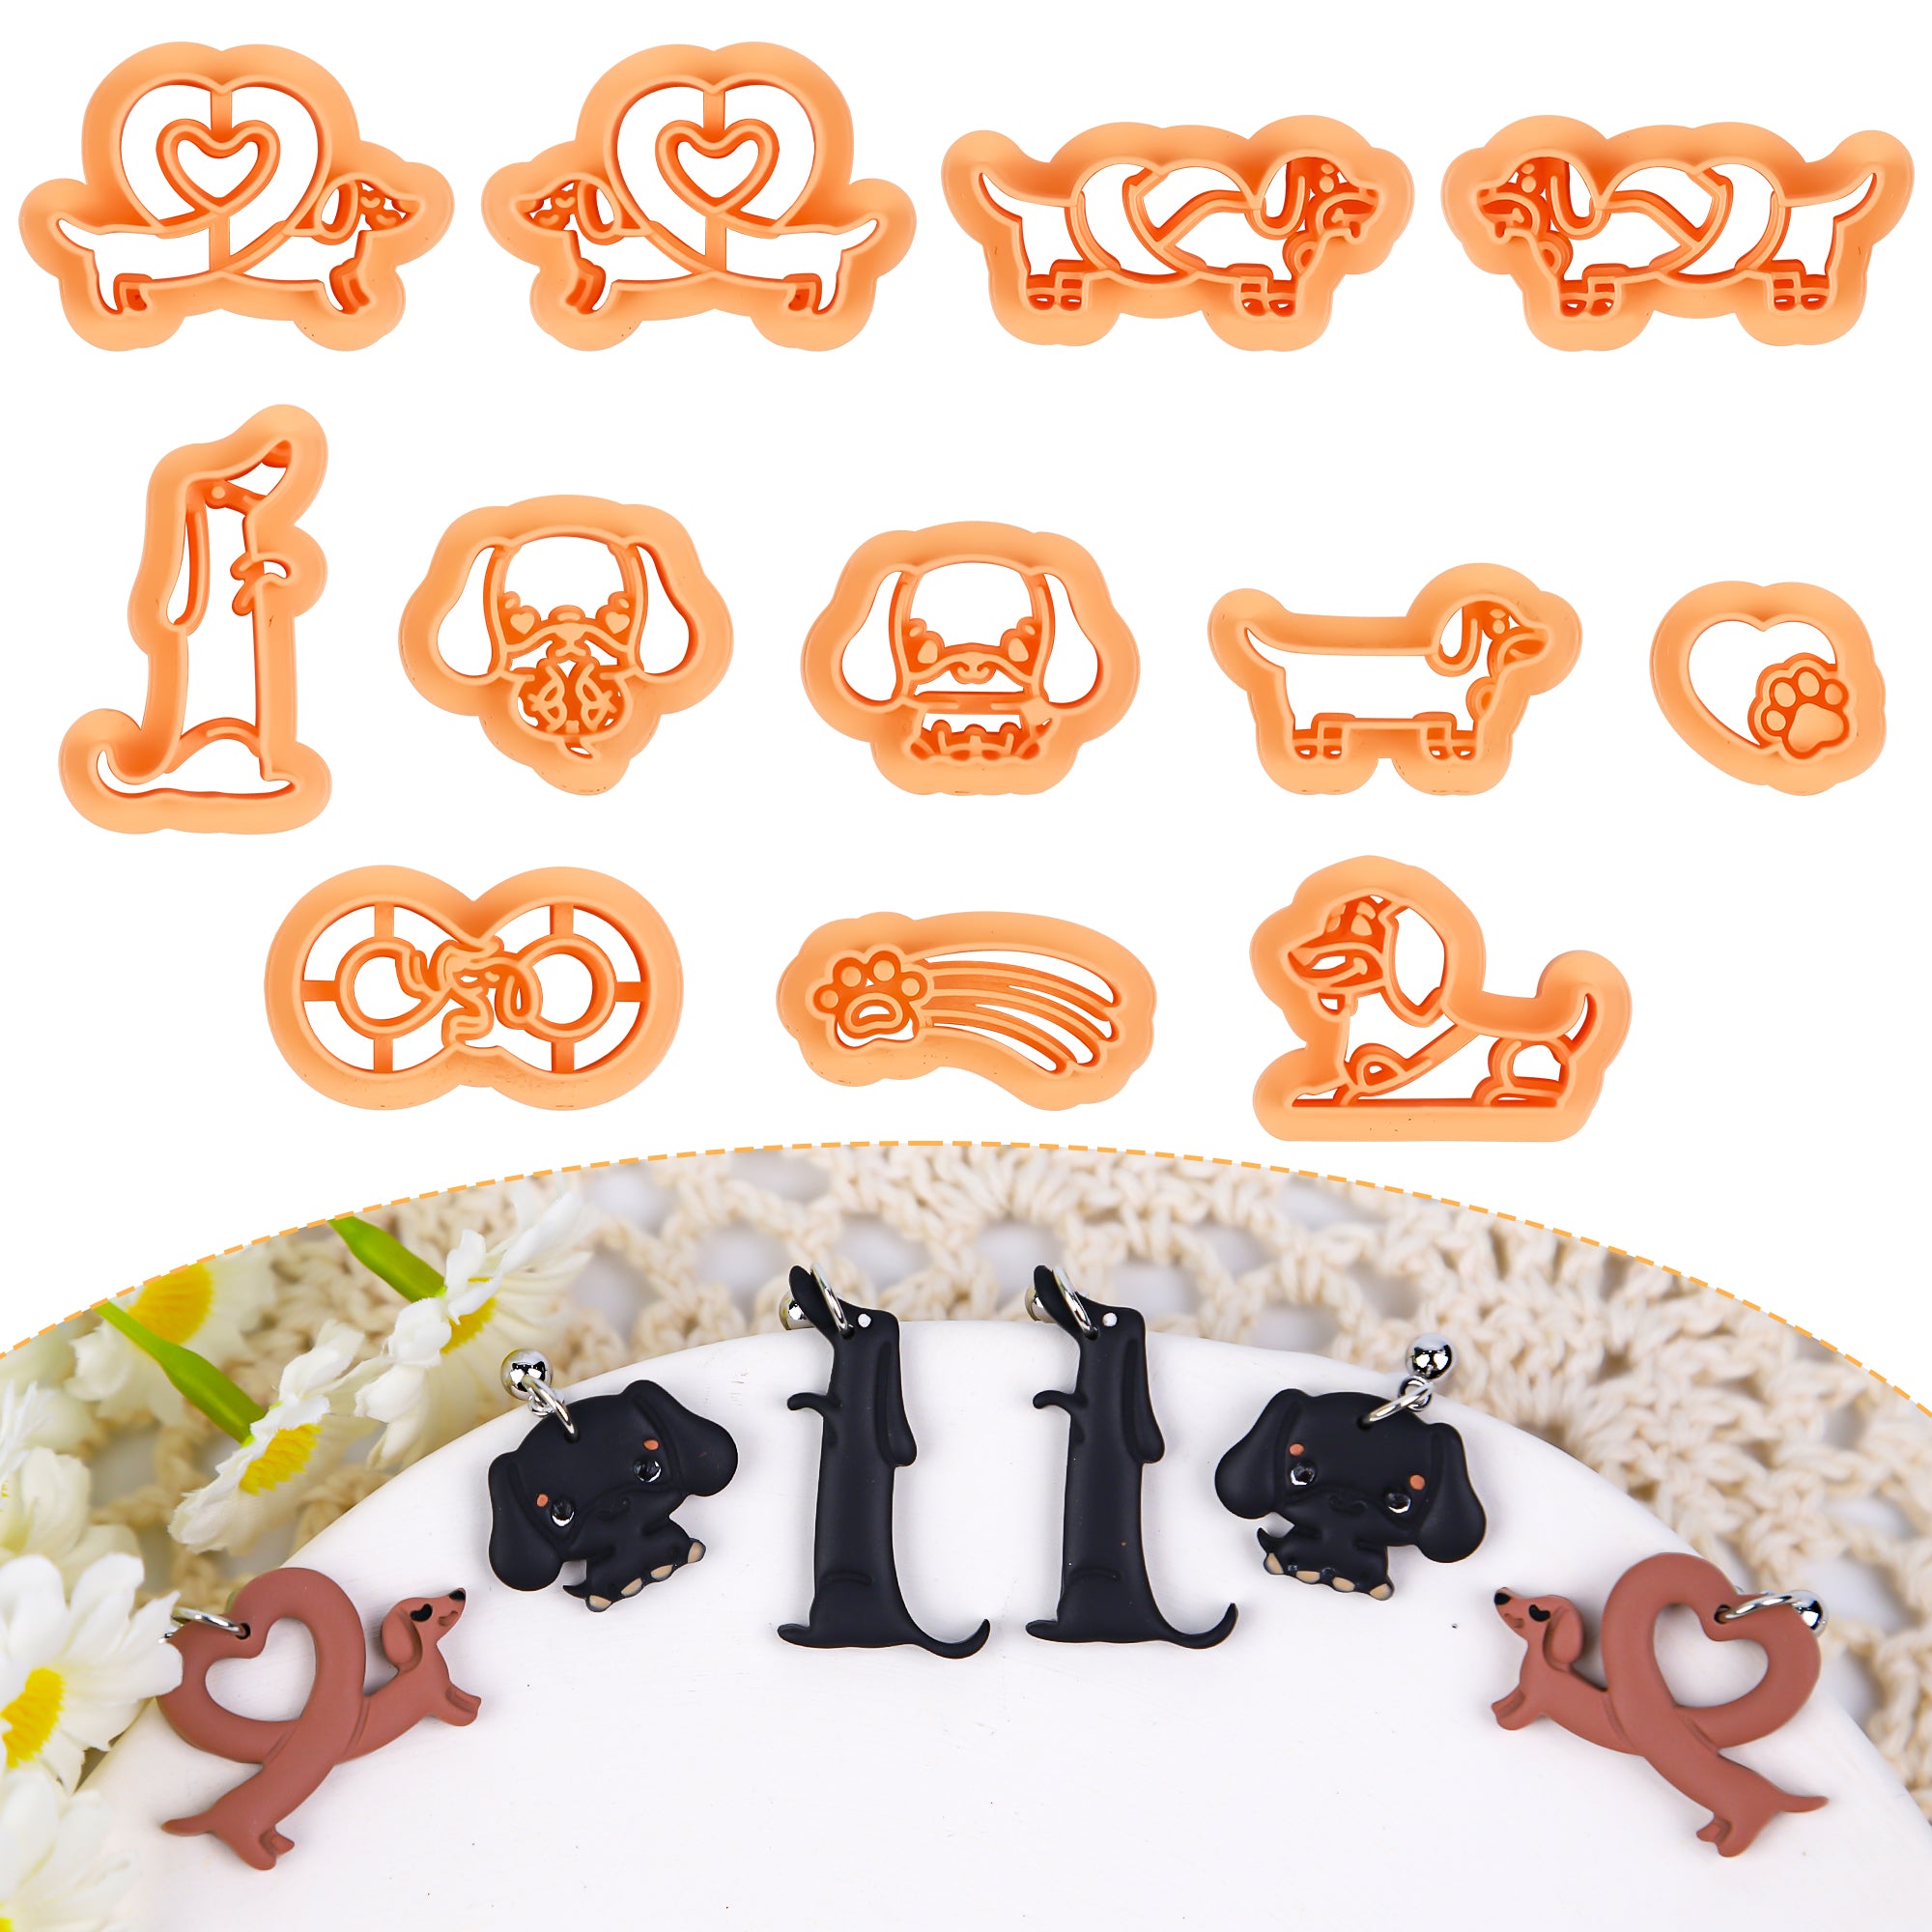 Puocaon Sausage Dog Clay Cutters - 12 Pcs Clay Cutters for Polymer Clay Earrings, Puppy Dog Pets Clay Cutters for Earrings Making, Animal Dog Clay Earring Cutters, Dachshund Clay Jewelry Cutters